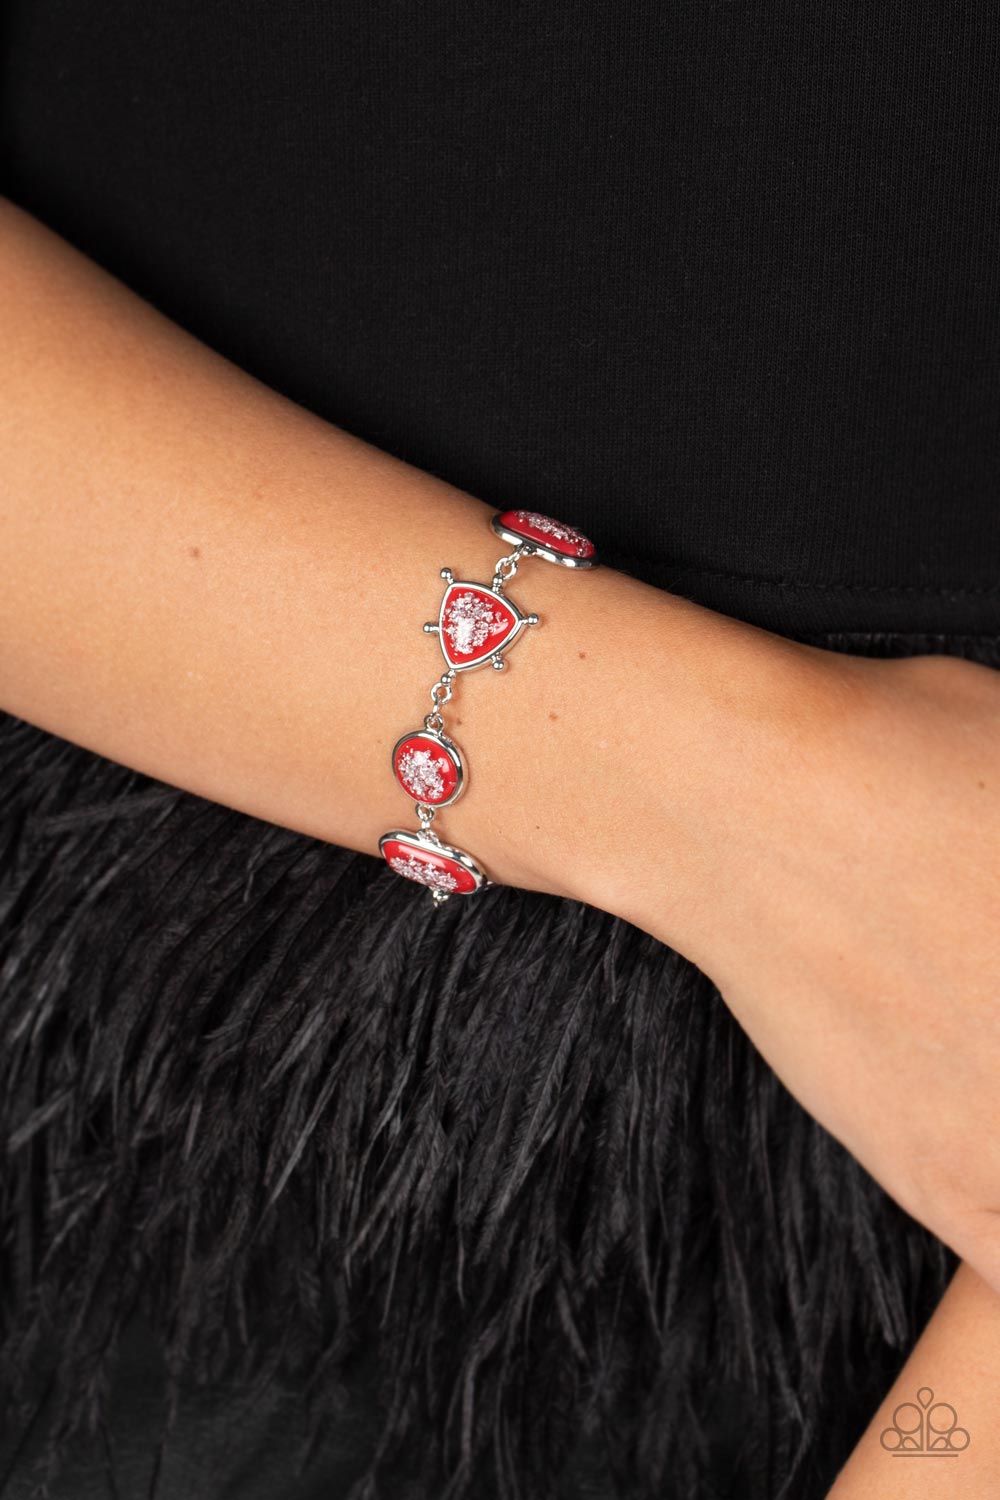 Speckled Shimmer - Red and Silver Bracelet- Paparazzi Accessories